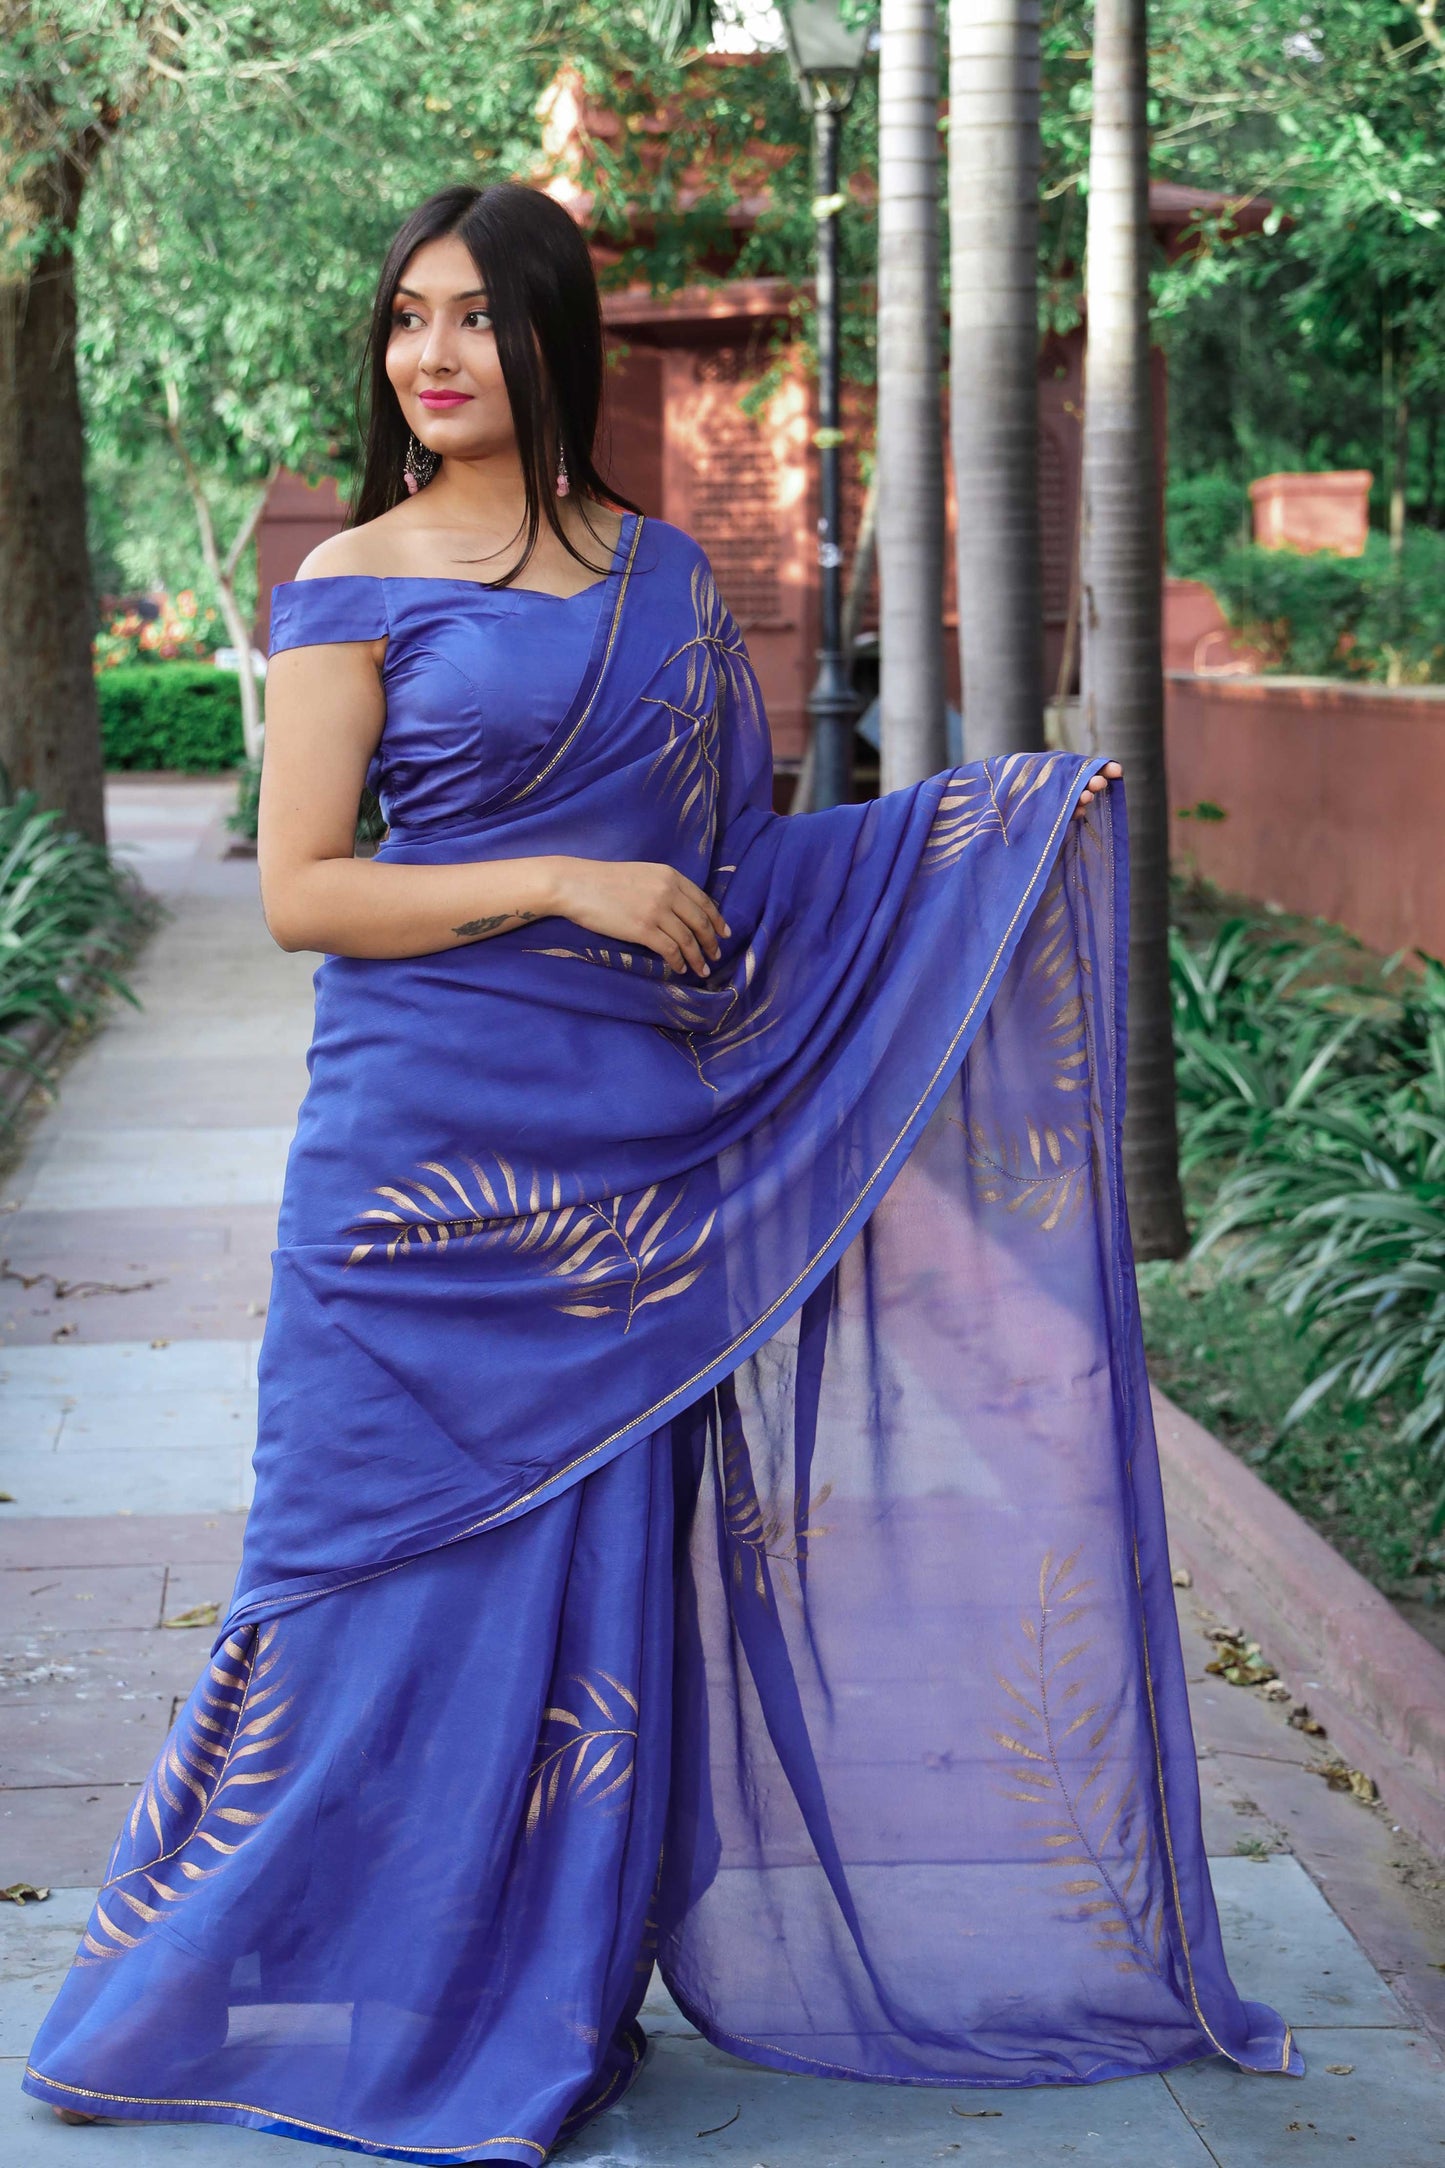 Elegant royal blue chinon chiffon silk saree with hand-painted golden palm leaves and cut beads embroidery. A stunning saree for a stylish, simple saree look. Perfect for weddings and special occasions